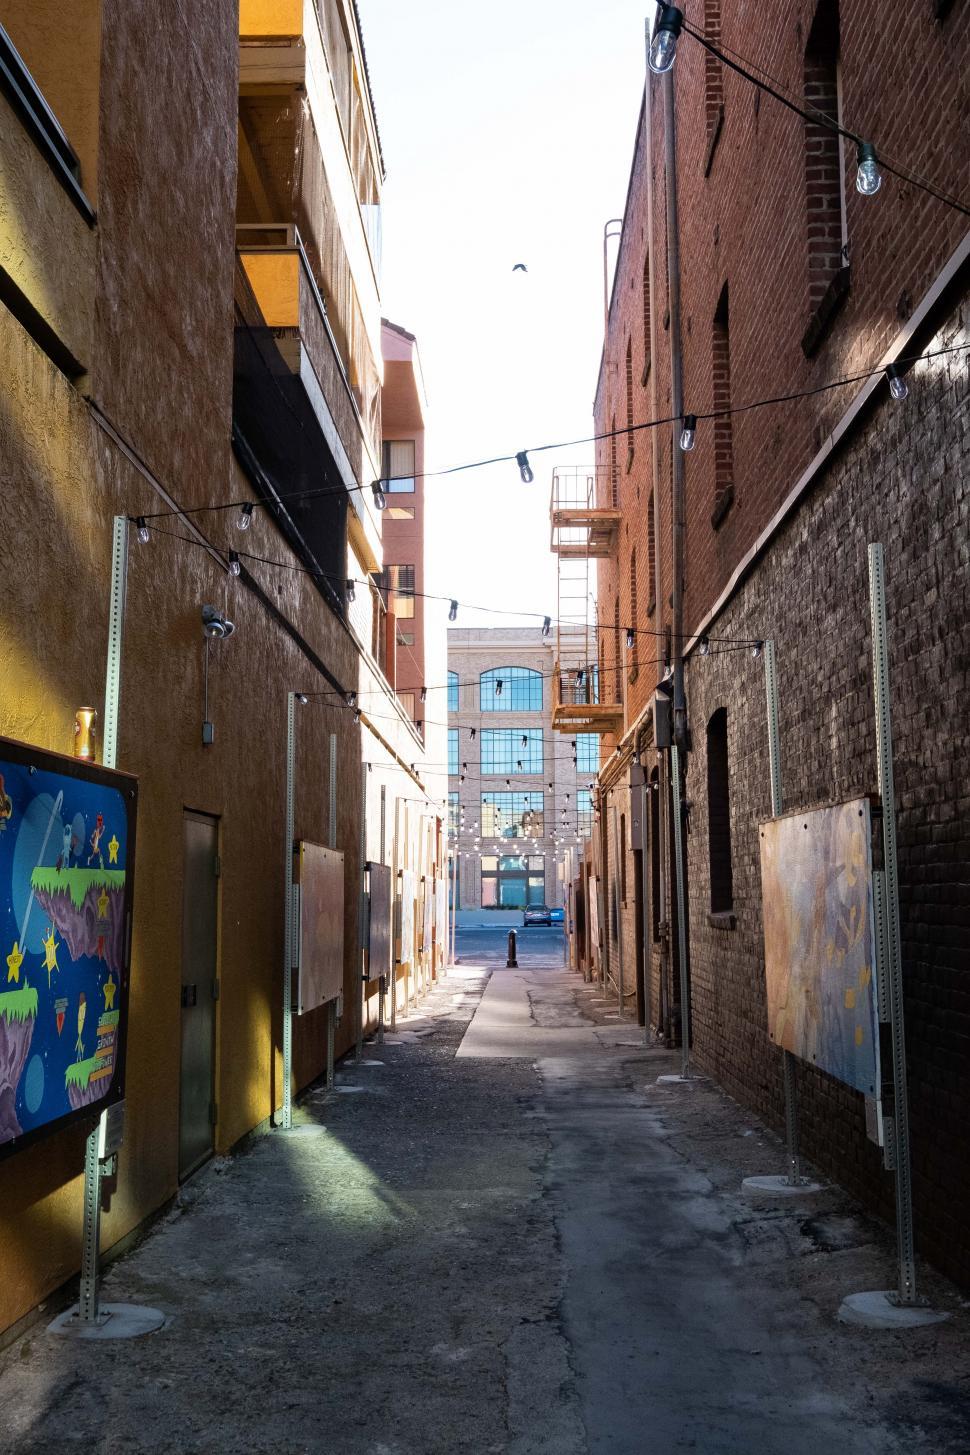 Free Image of Deserted alley and buildings with grunge walls 